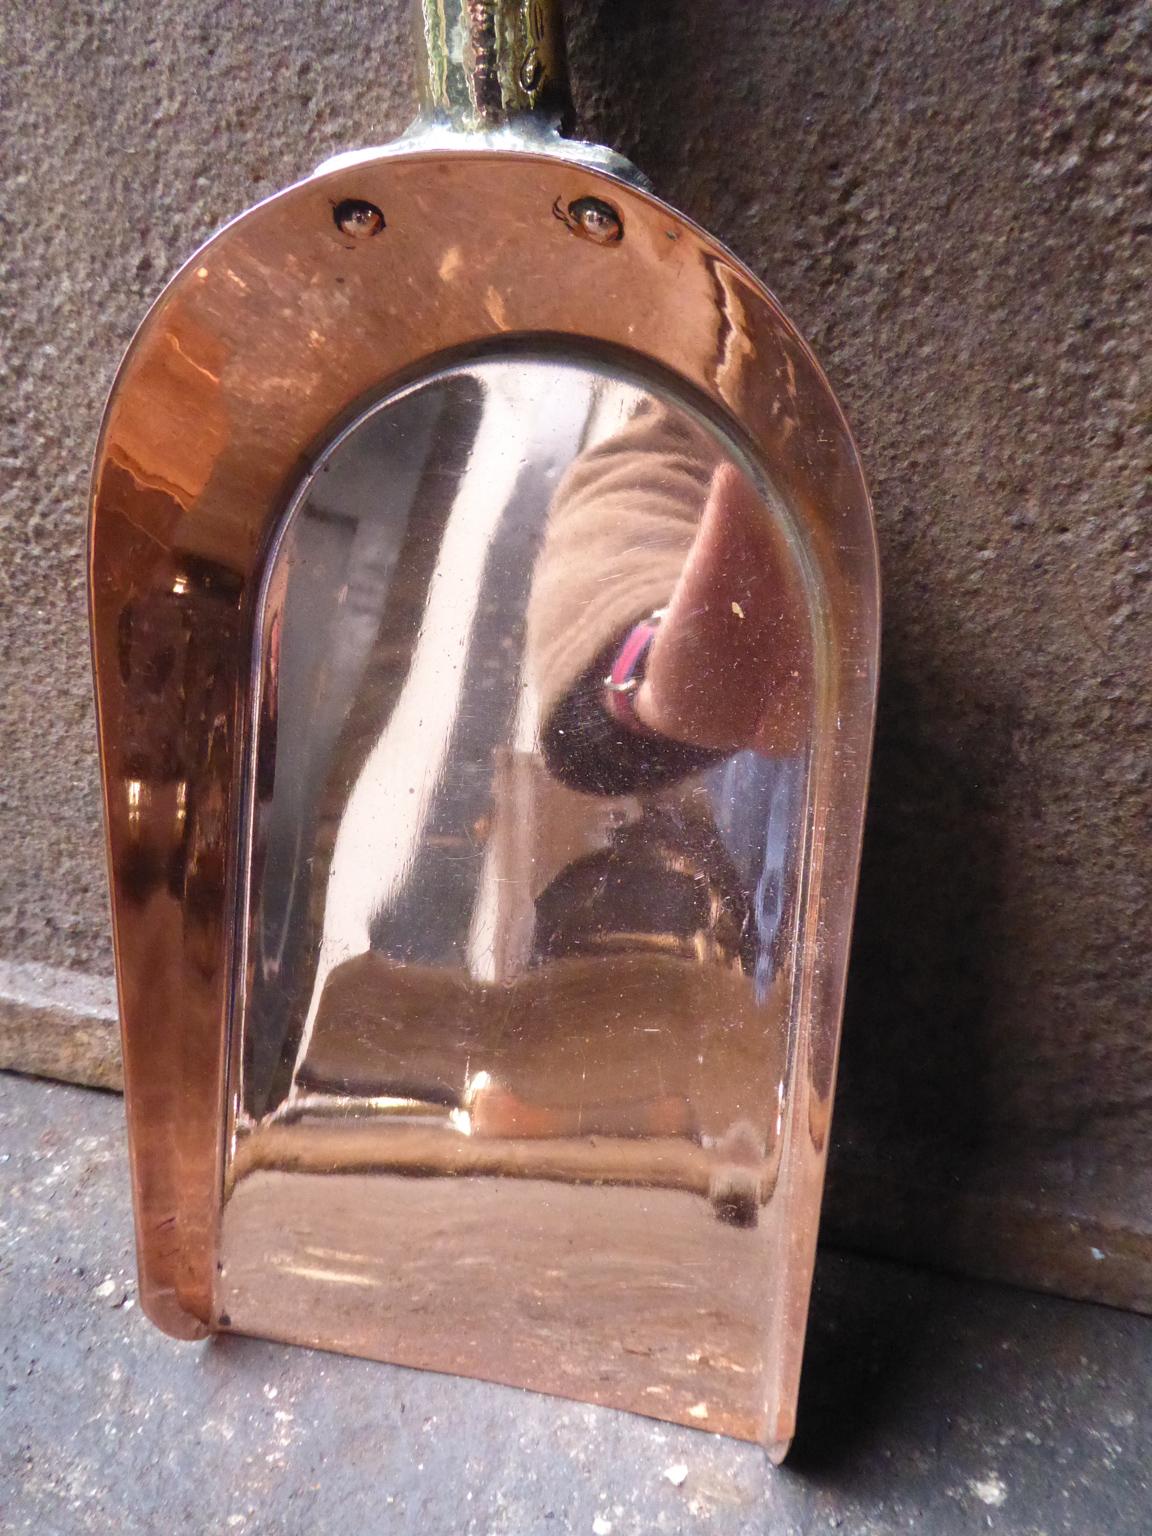 19th century English Georgian fireplace shovel made of polished brass, polished copper and wood.